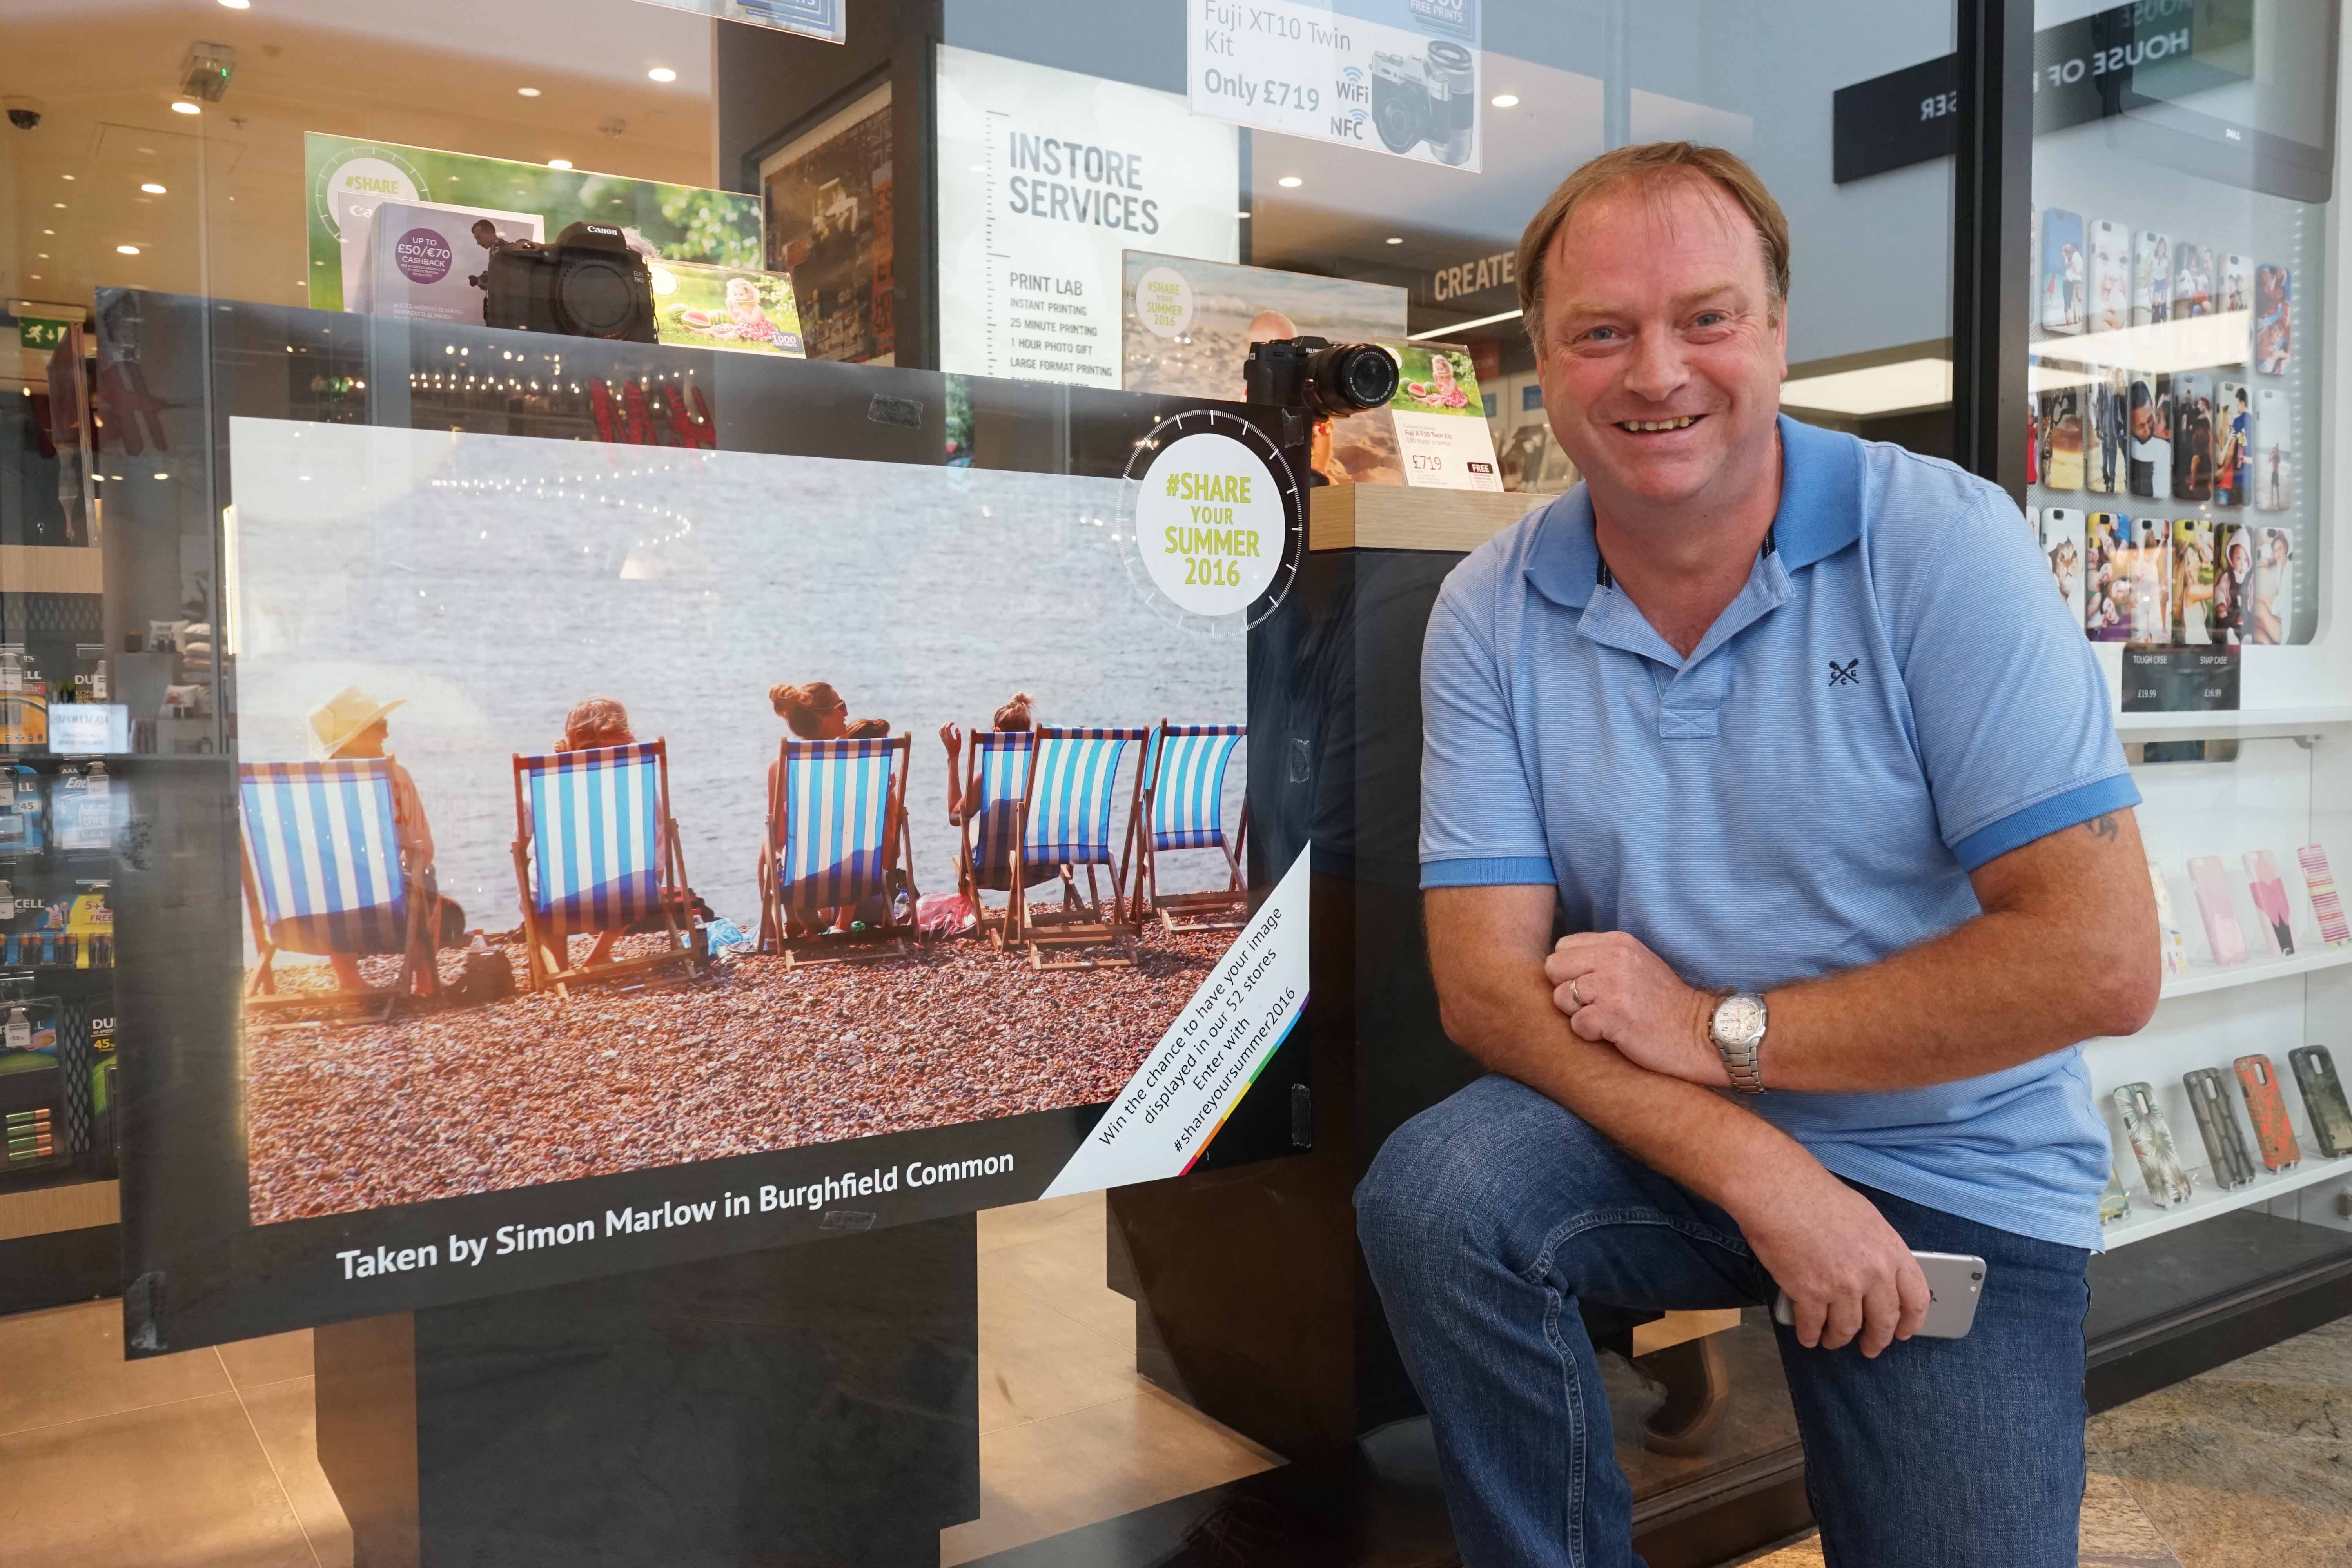 Simon Marlow next to his winning image displayed in Jessops Reading